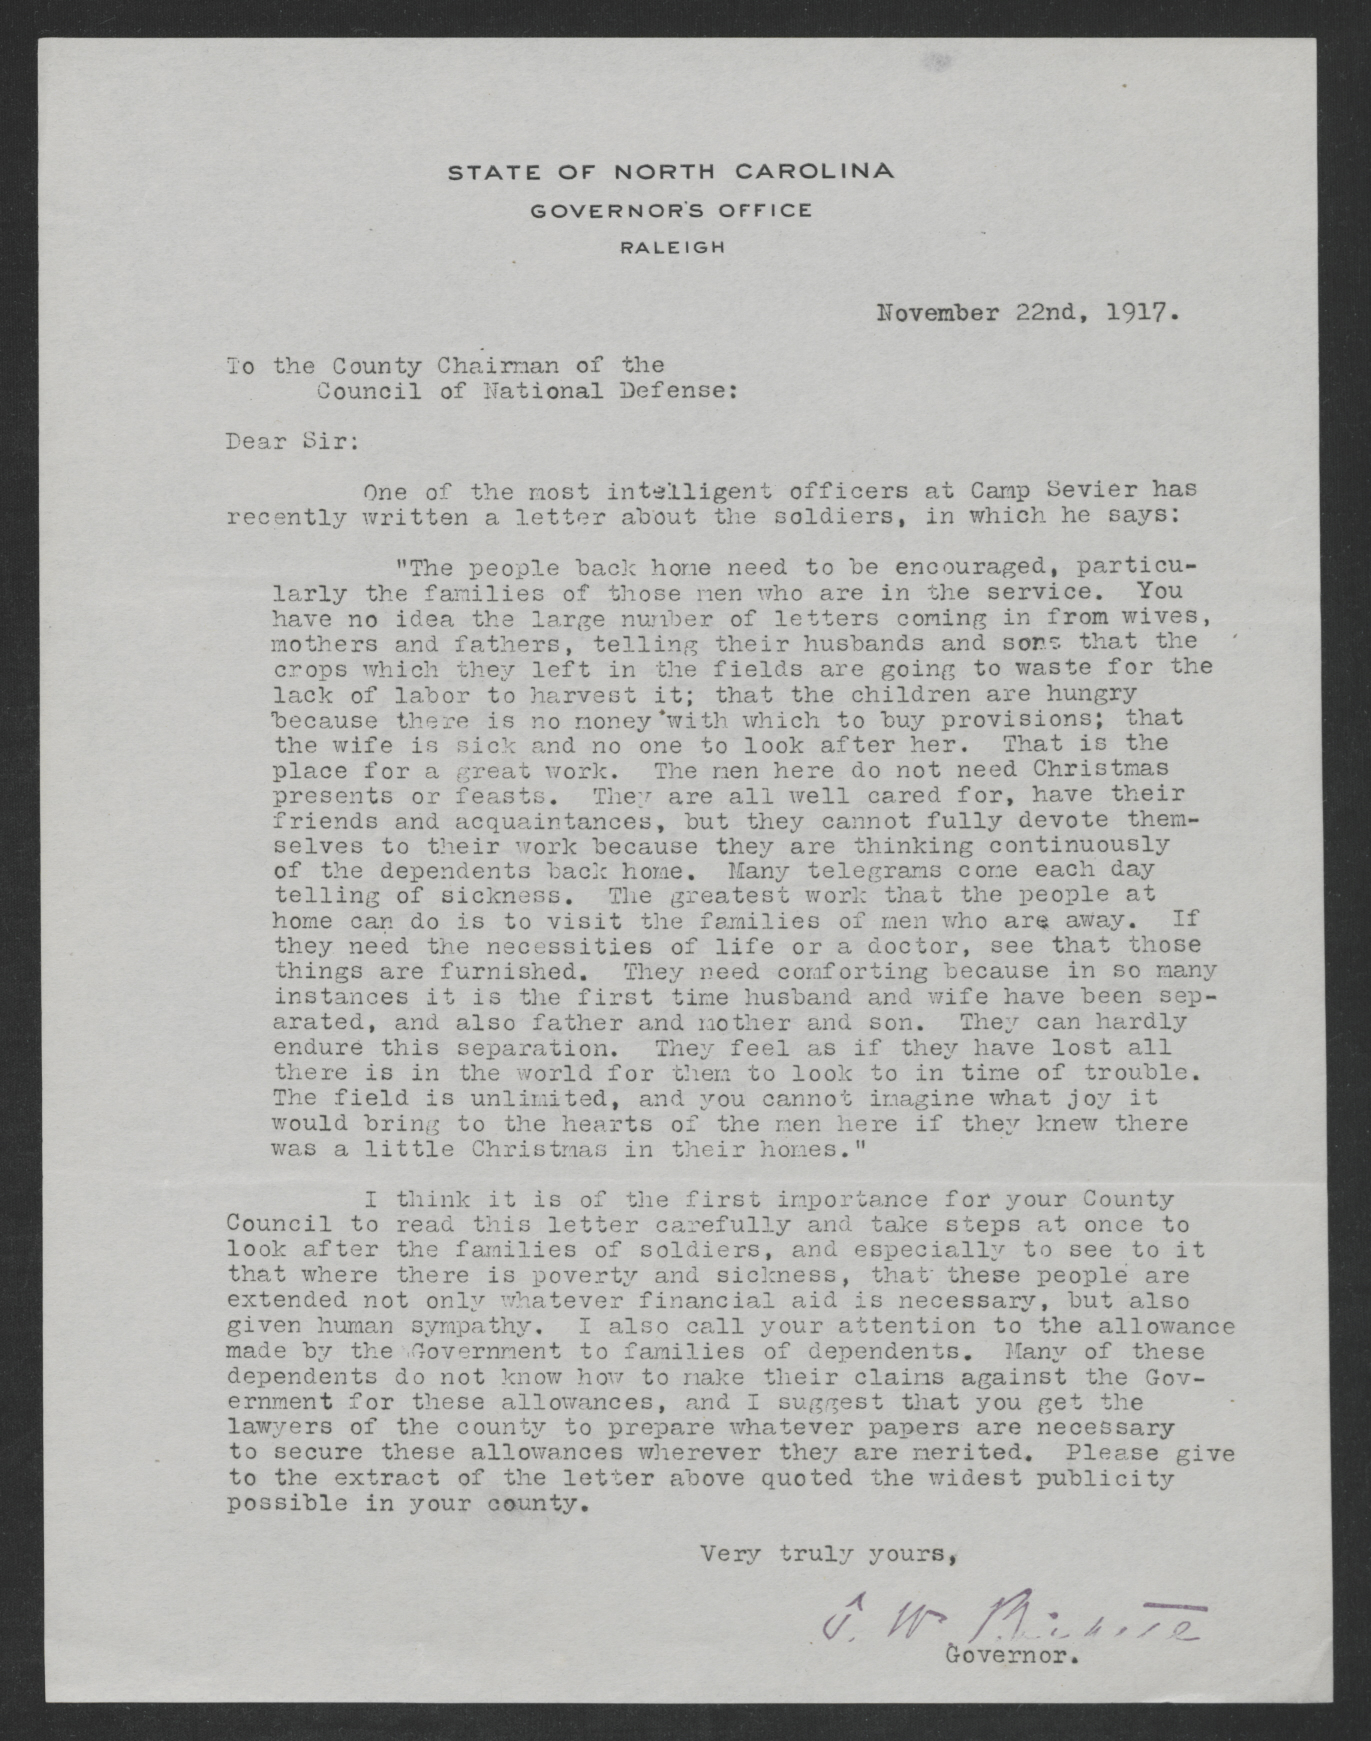 Letter from Thomas W. Bickett to the County Chairman of the Council of National Defense, November 22, 1917